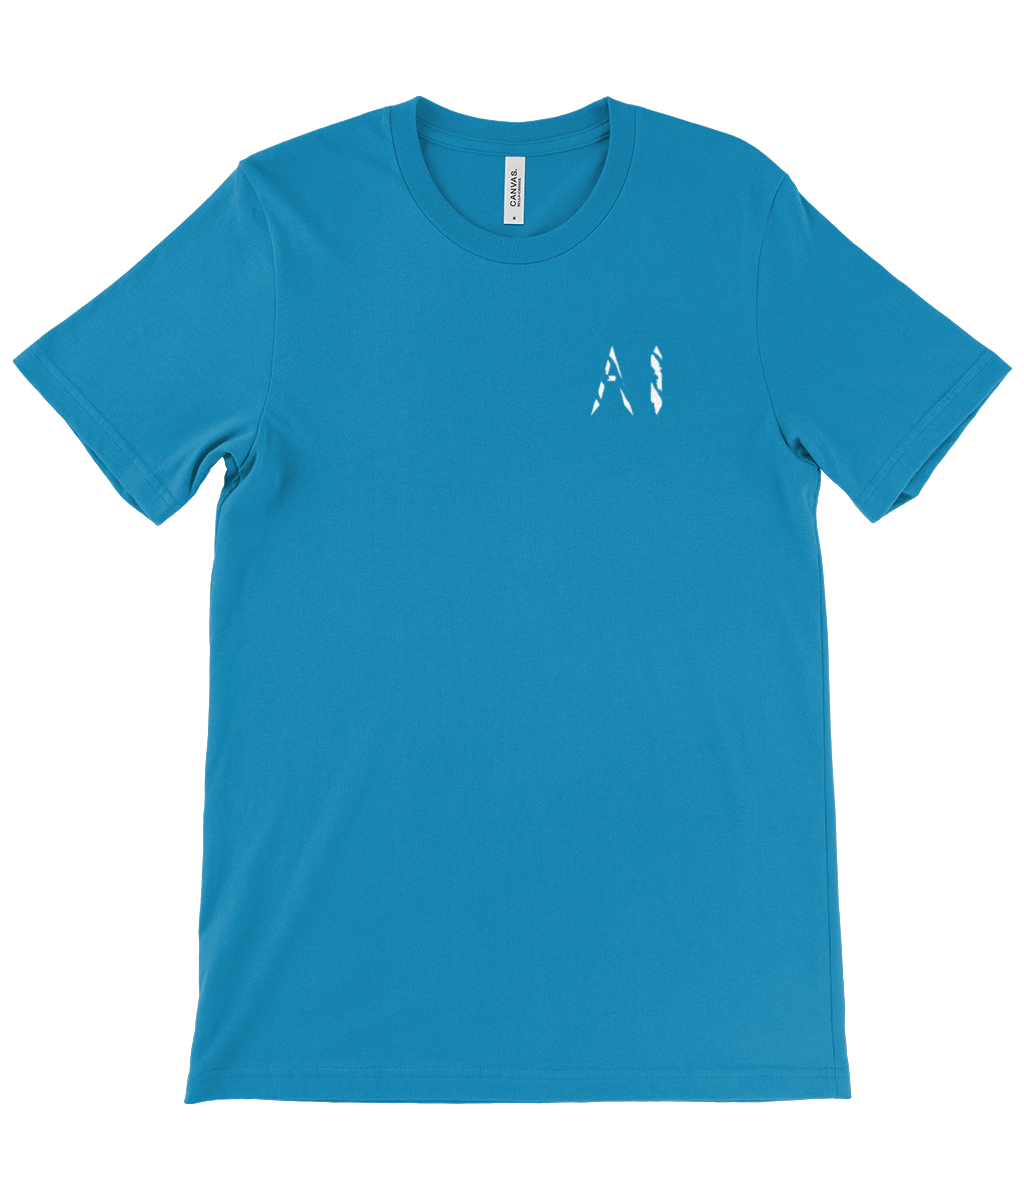 Mens blue Casual T-Shirt with white logo on the left chest